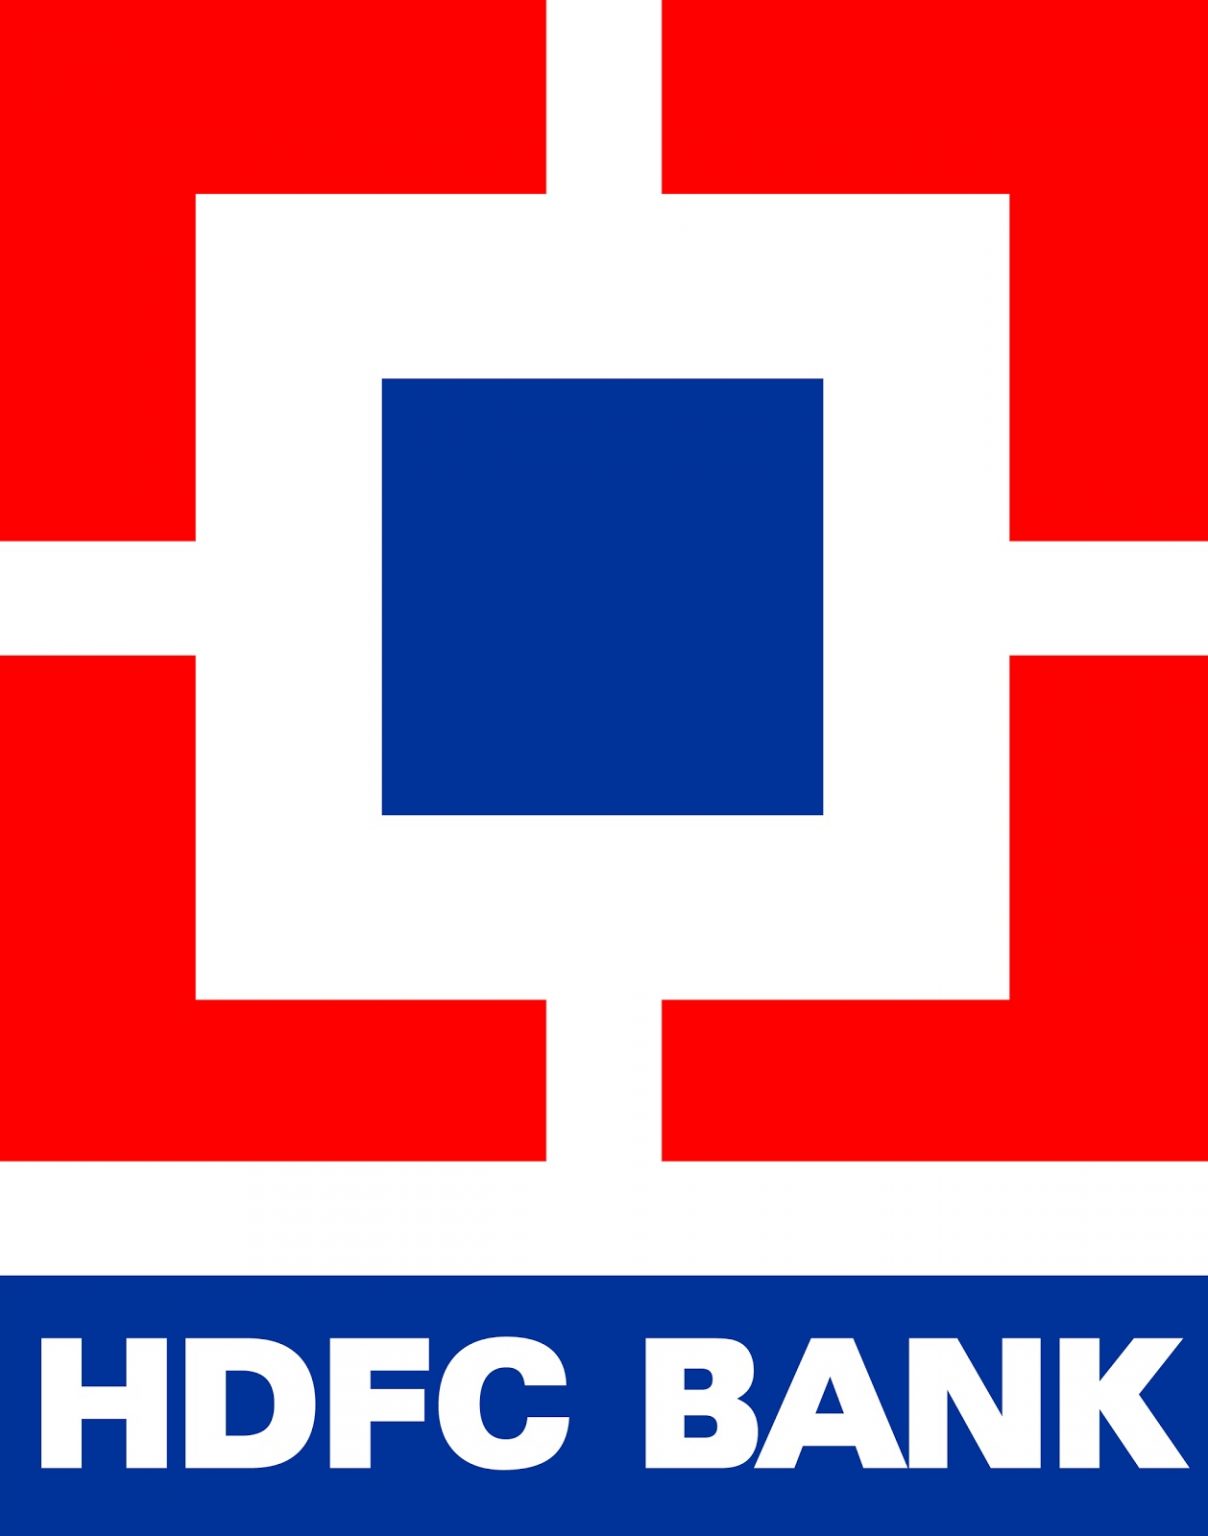 Hdfc Hiring Freshers Any Graduate Can Apply Private Bank Jobs For Freshers 8346